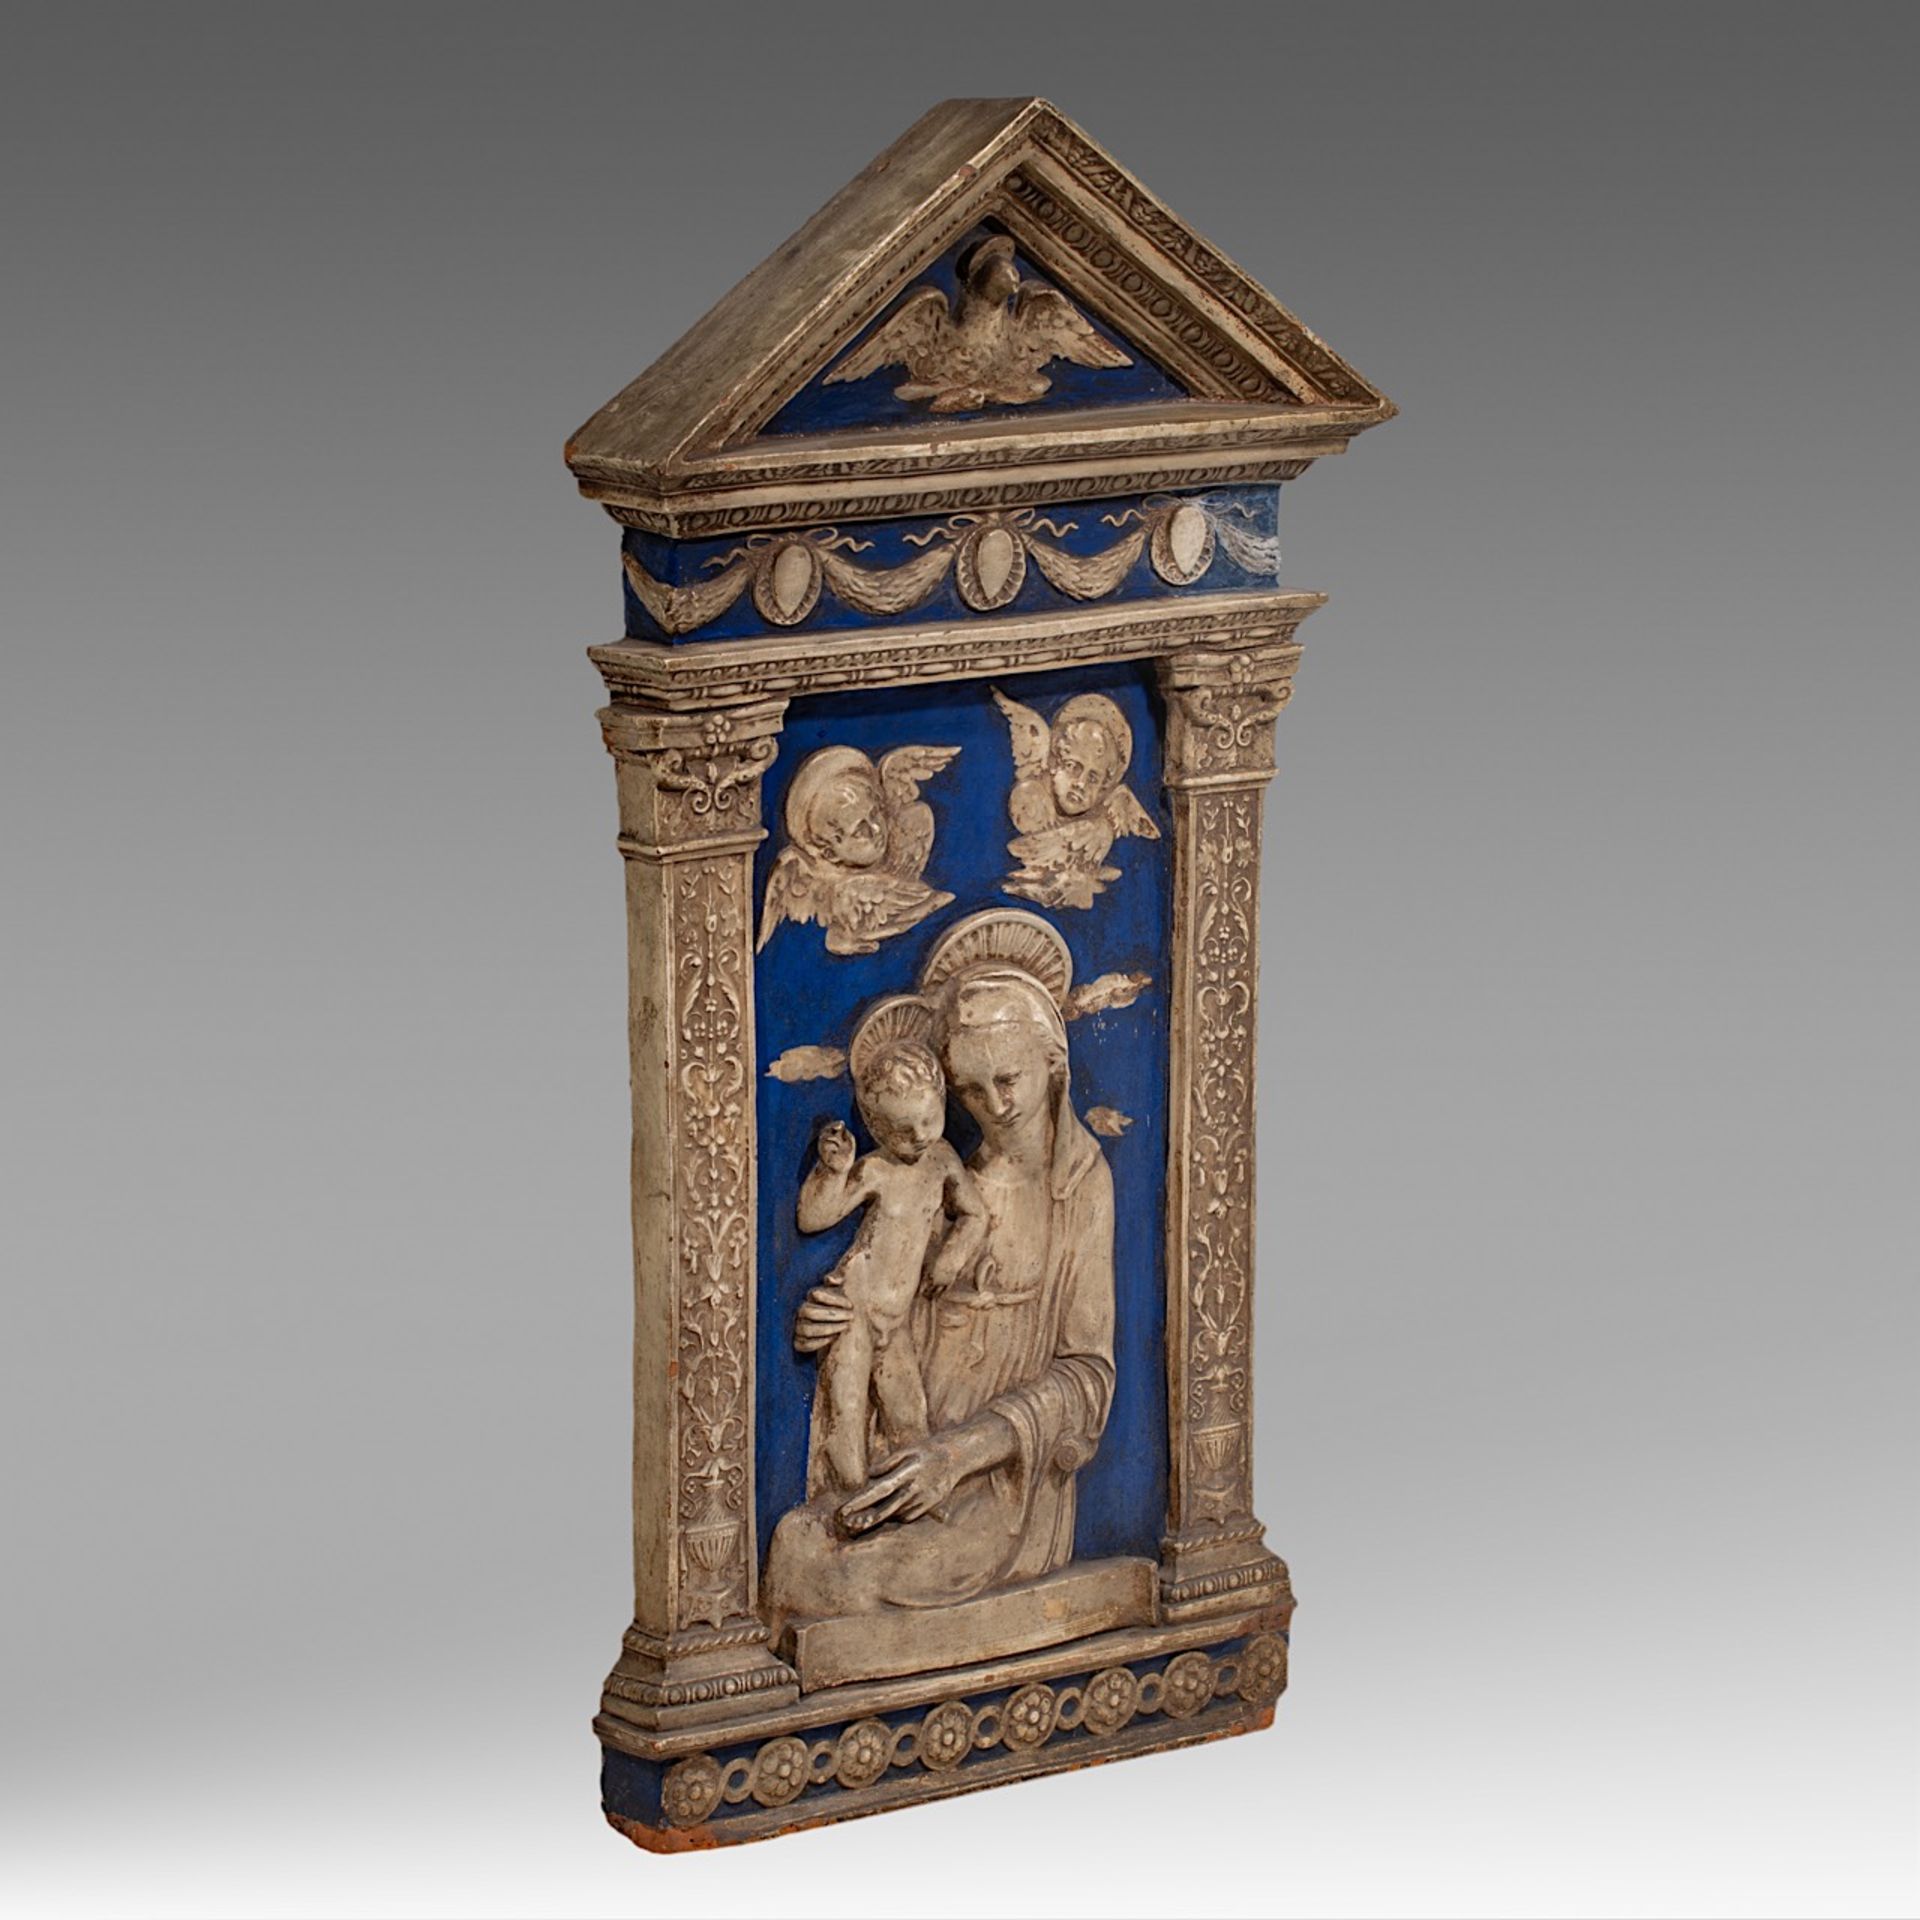 A blue and white glazed terracotta relief of the Virgin and Child in the Della Robbia manner or a fo - Image 3 of 6